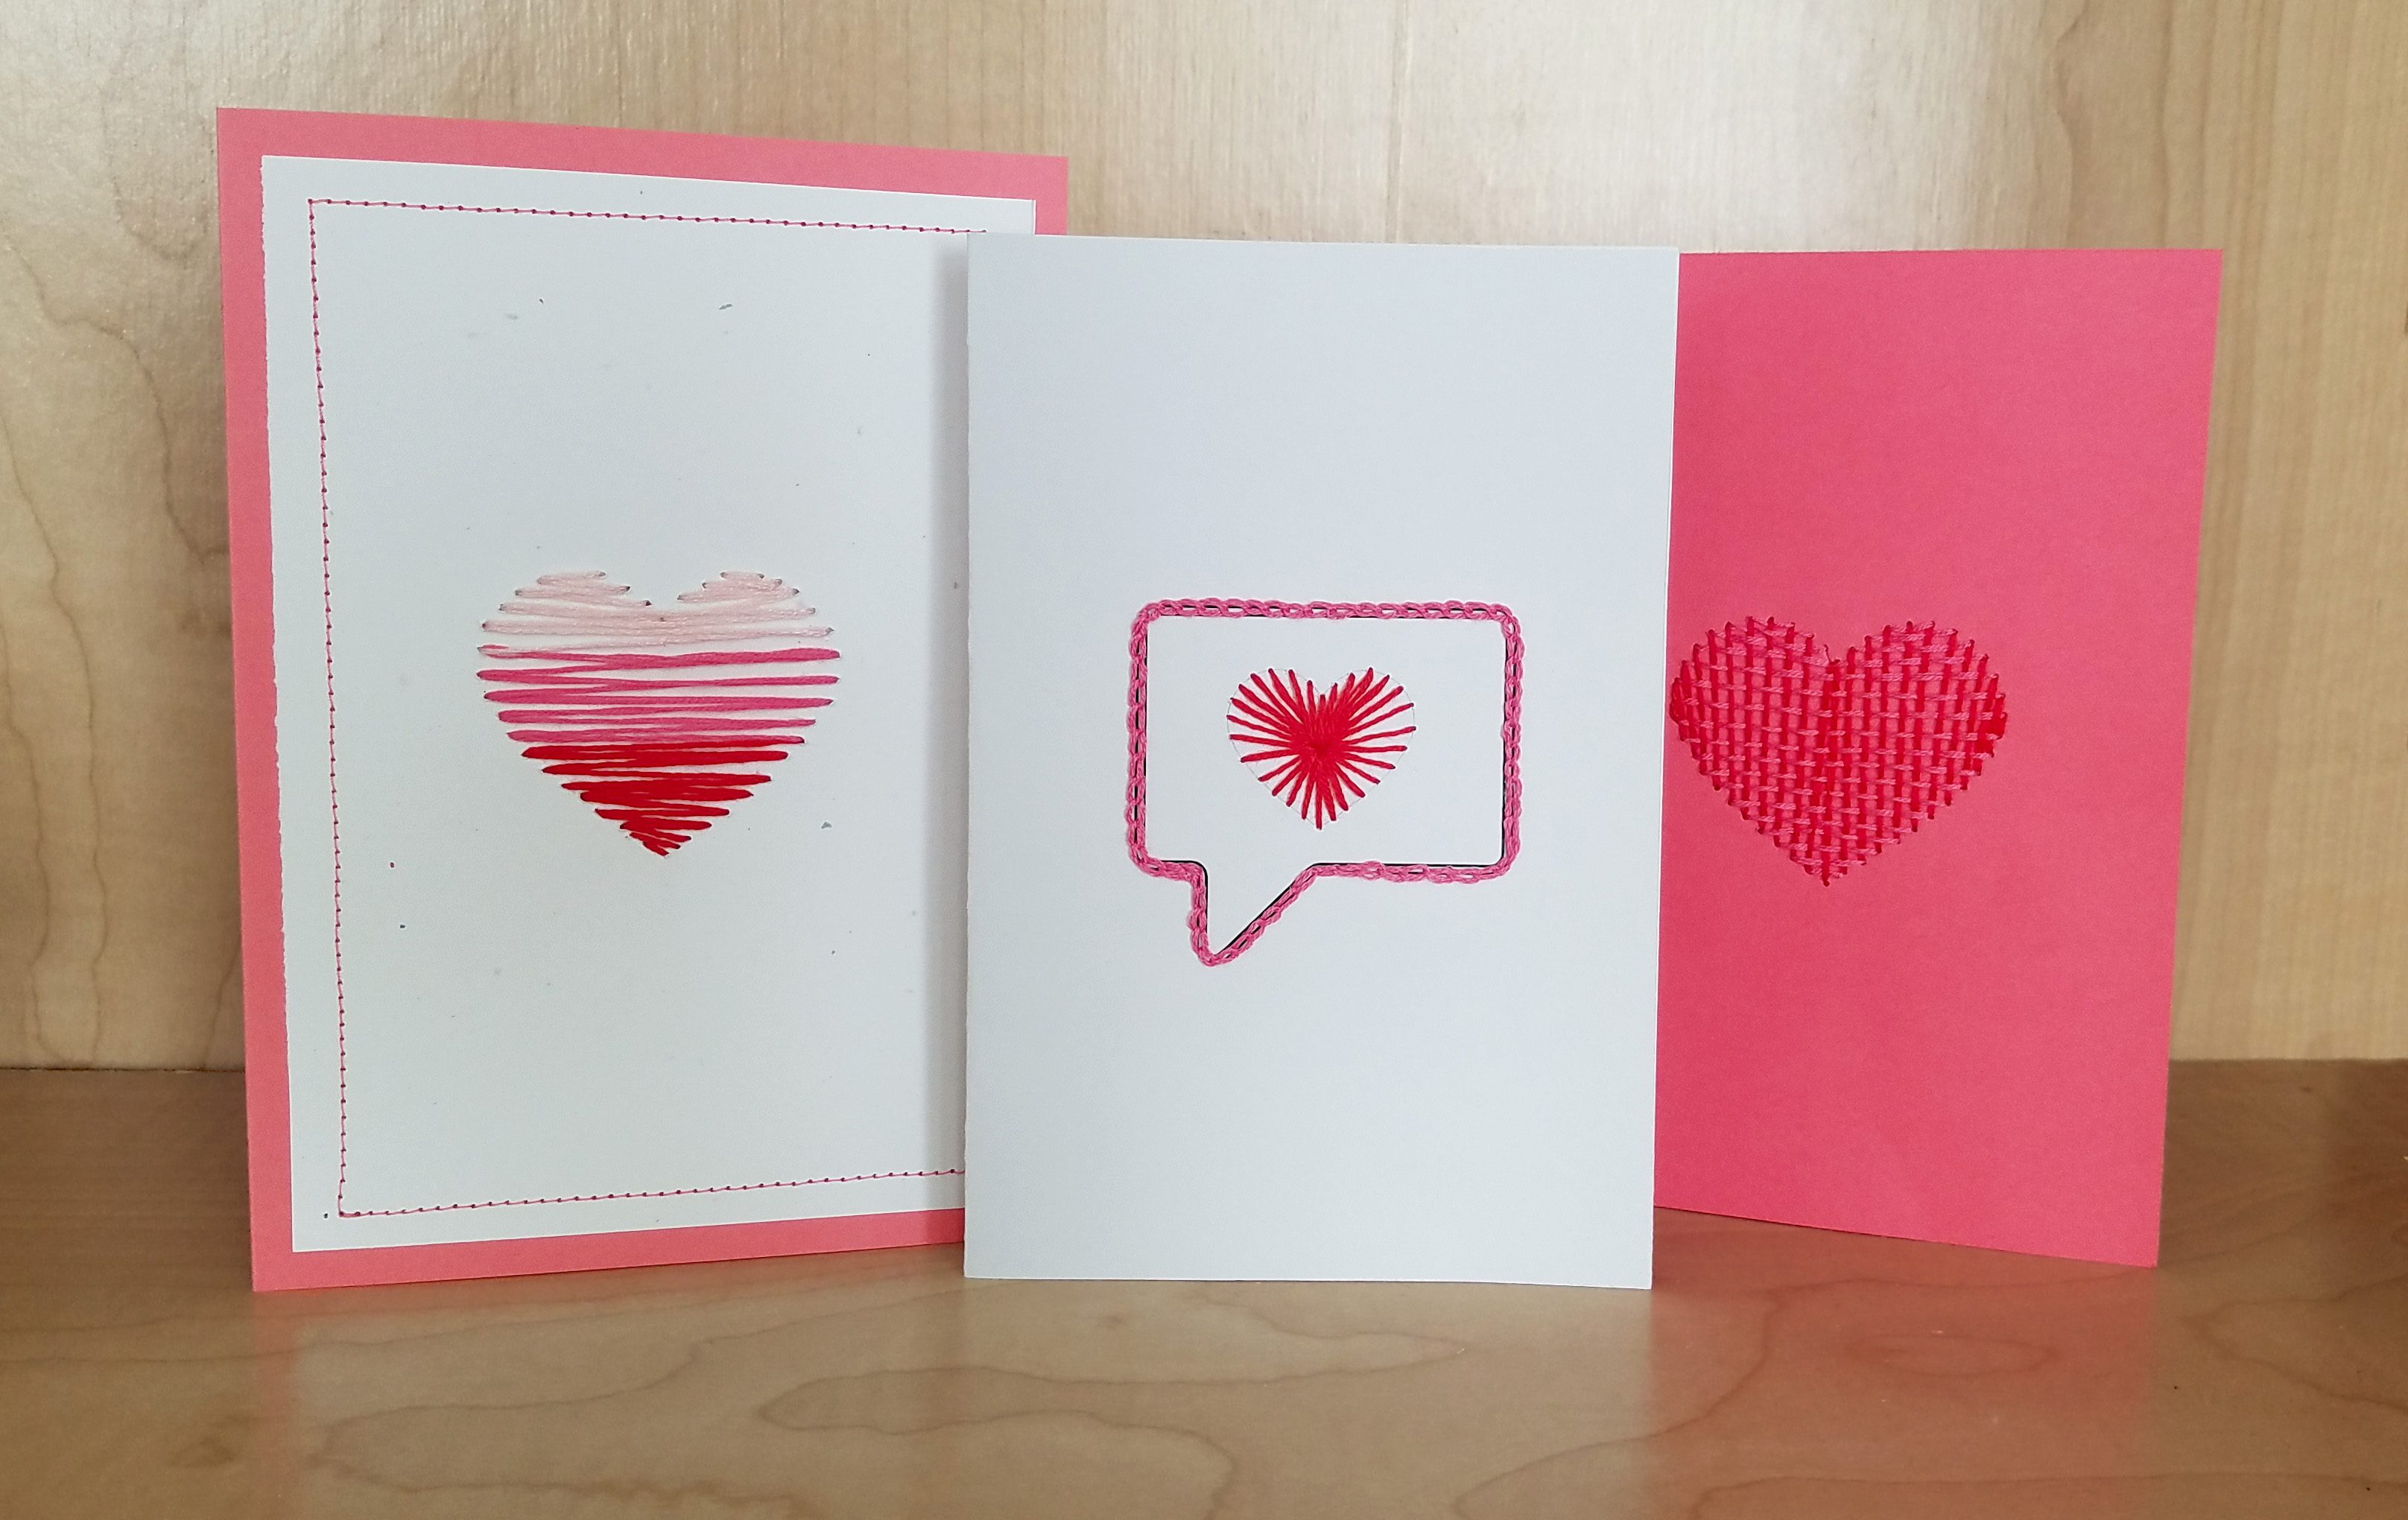 3 hand embroidered Valentine cards with hearts made of embroidery floss